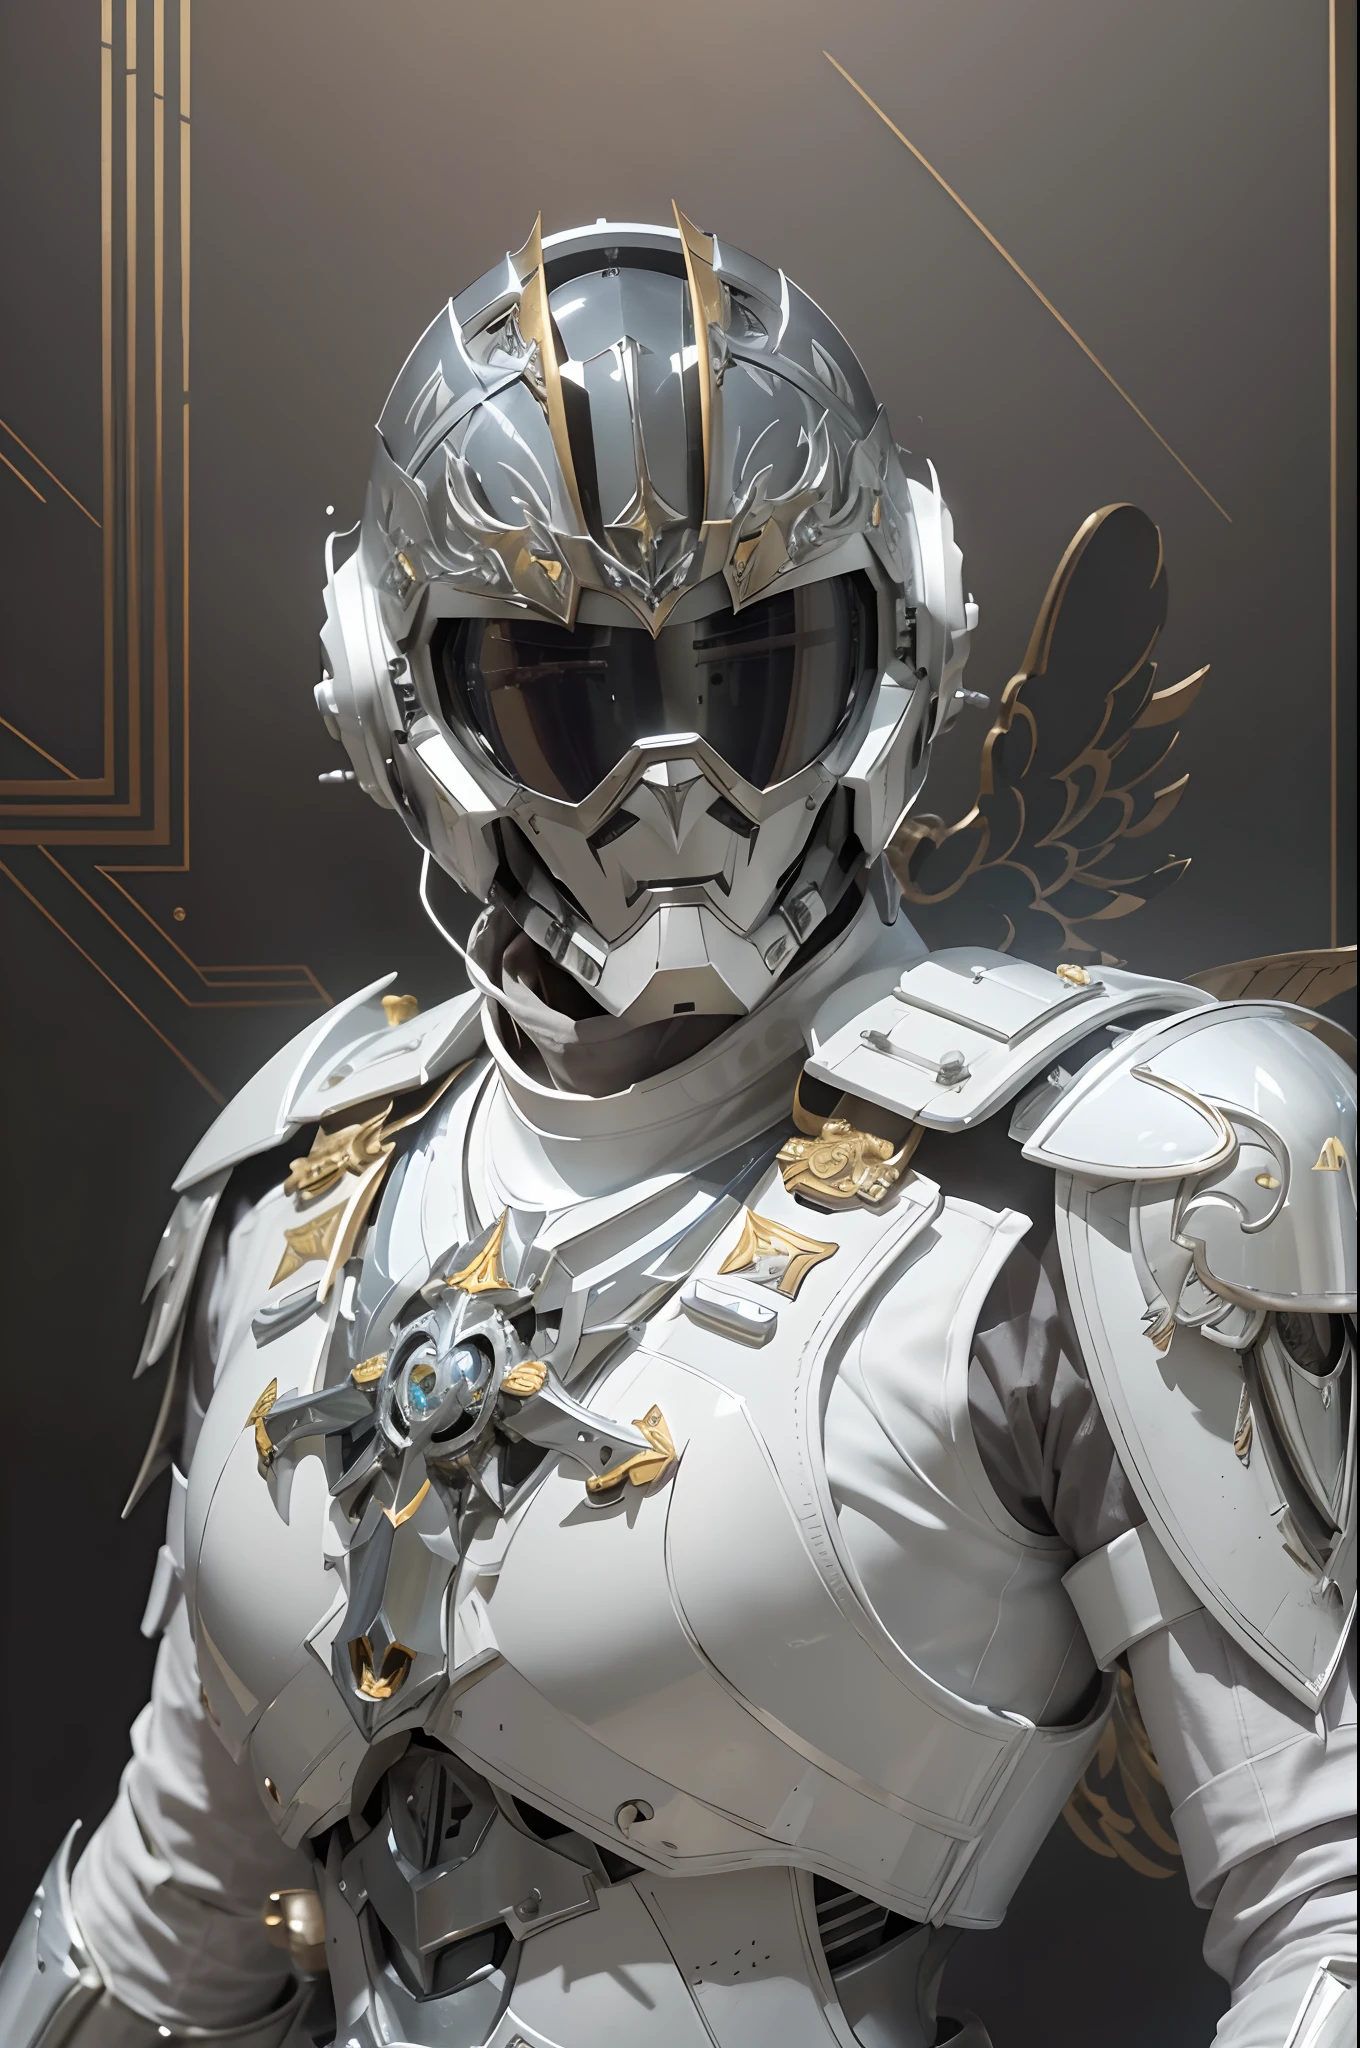 male decopunk angel mecha deer knight in full body beautifully elegant mechanical angel armor, full head helmet with a full face white steel knight visor, bright vibrant eyes, armor is pure white with pale gold accents, armor is gorgeously engraved with art deco patterns that flow down the arms and chest and legs, wide spread beautifully designed white mechanical angel wings, face covered, face hidden behind elegantly beautiful decopunk knight helmet visor, upper body portrait, anime art style